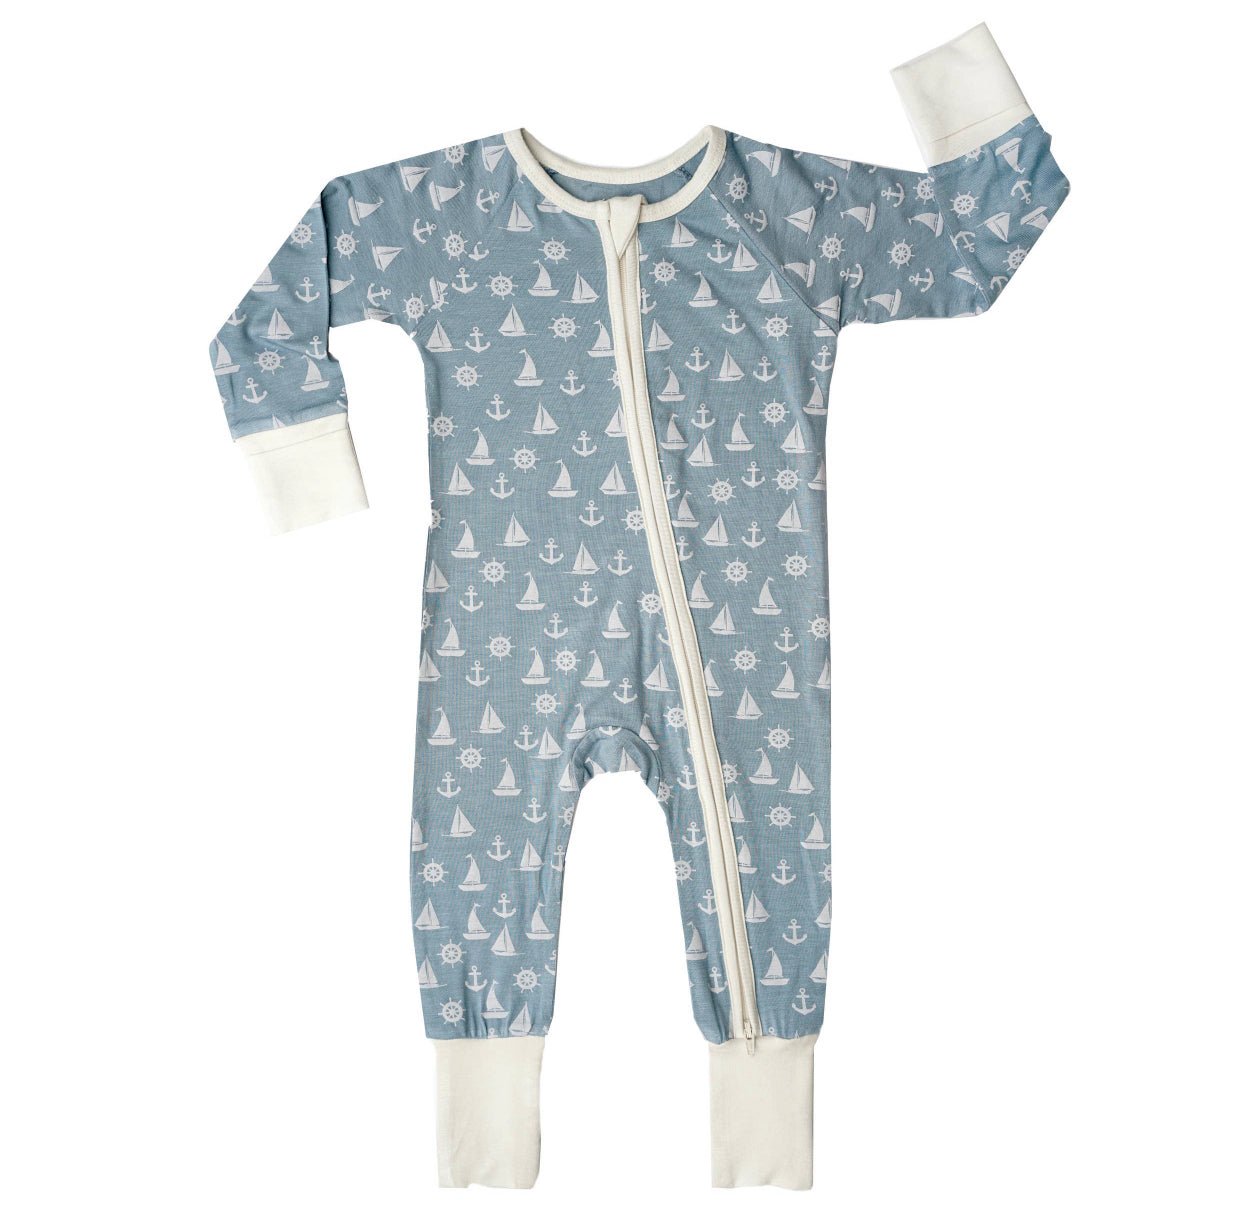 Anchors Away Bamboo Convertible Baby Pajama - Wild Child Hat CoEmerson and Friends